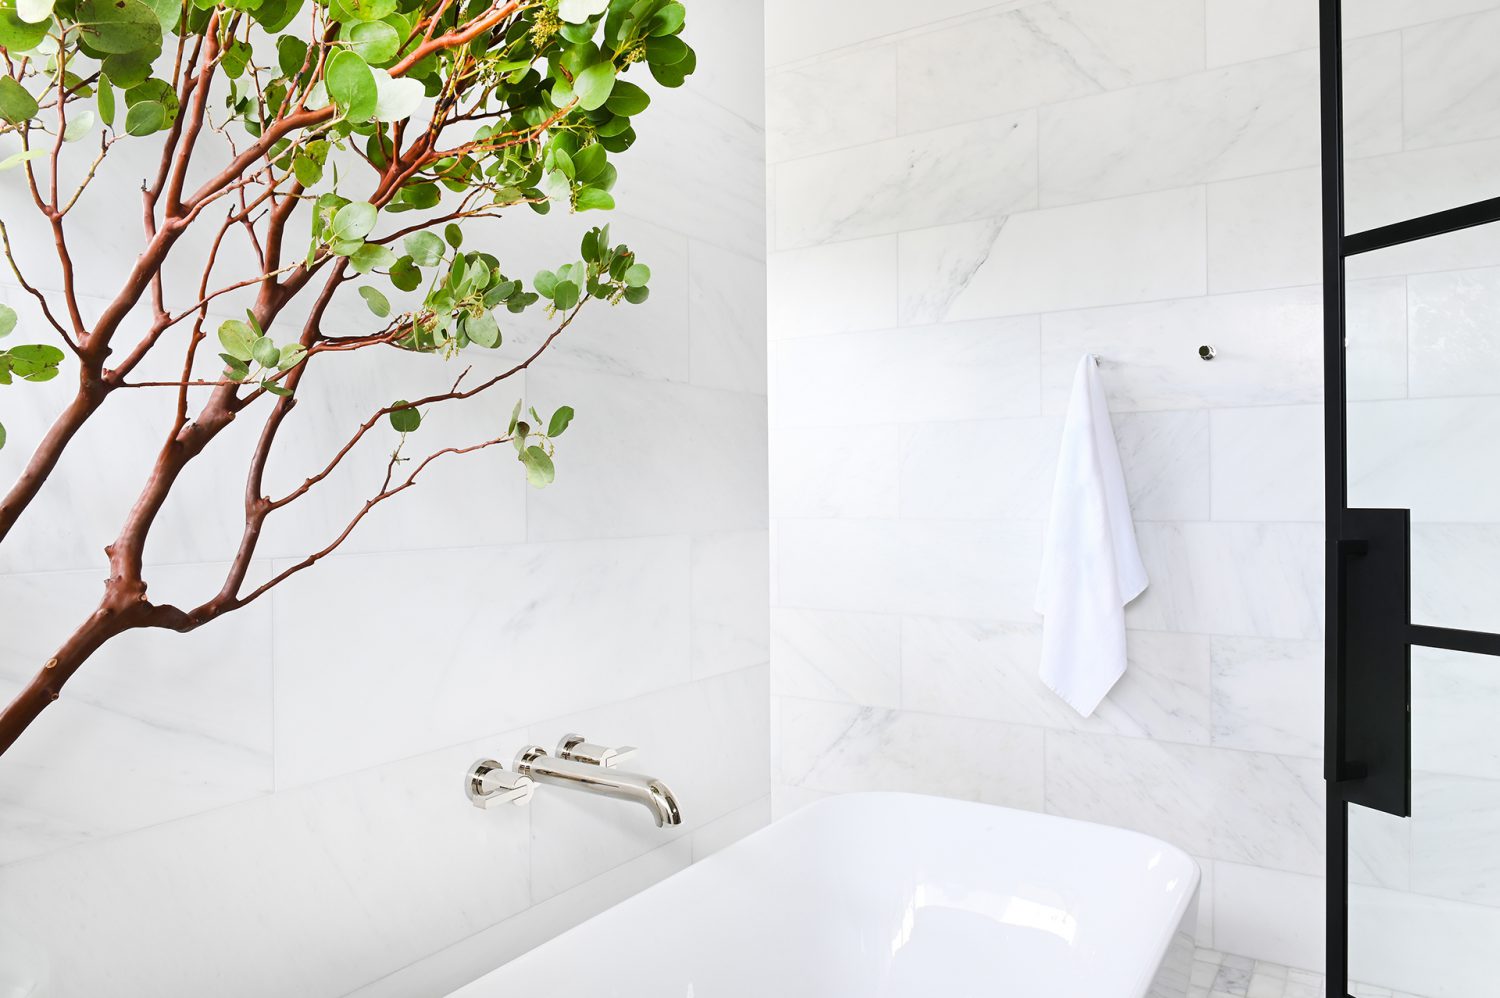 Ferme Moderne bath tub with marble backsplash and green tree designed by Midland Premium Properties in Vancouver, BC